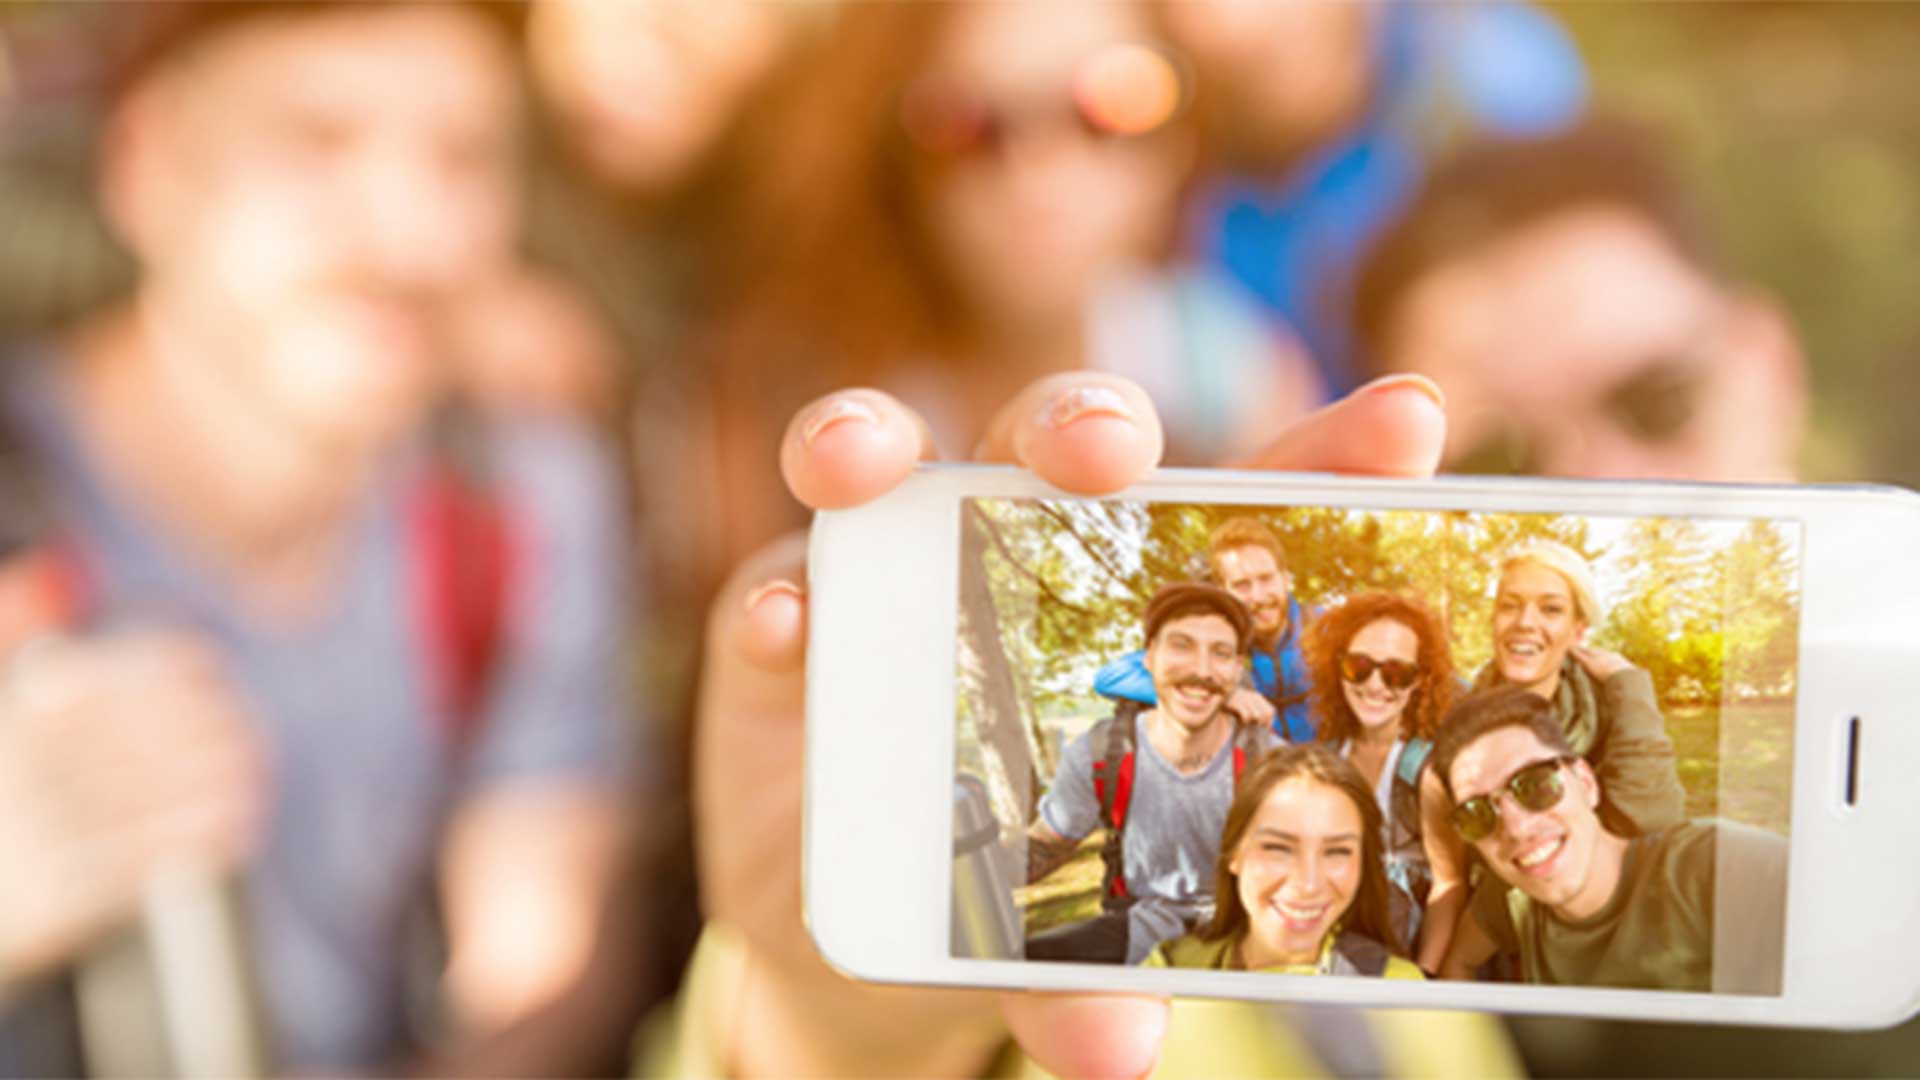 Group of people holding an iPhone and taking a selfie